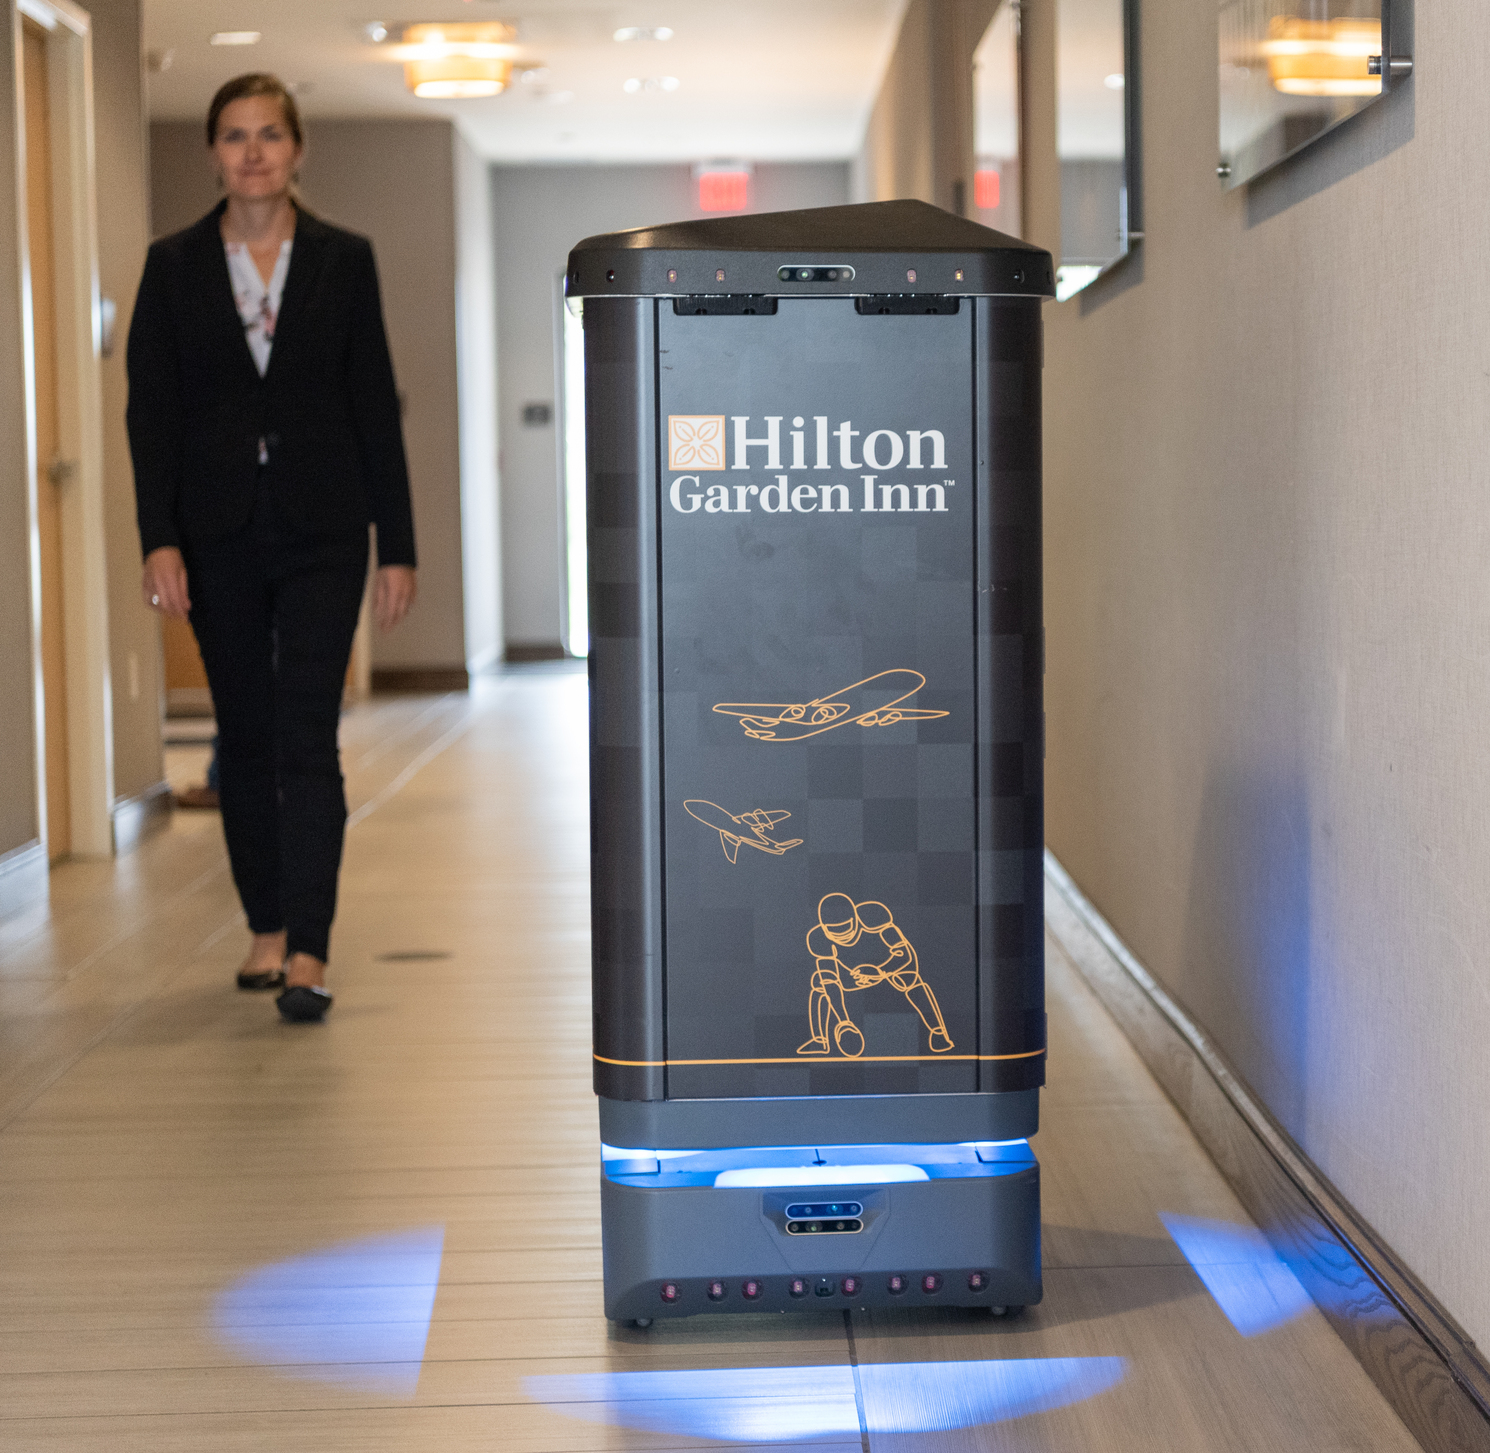 hotel delivery robot navigating hallway while guest walks by